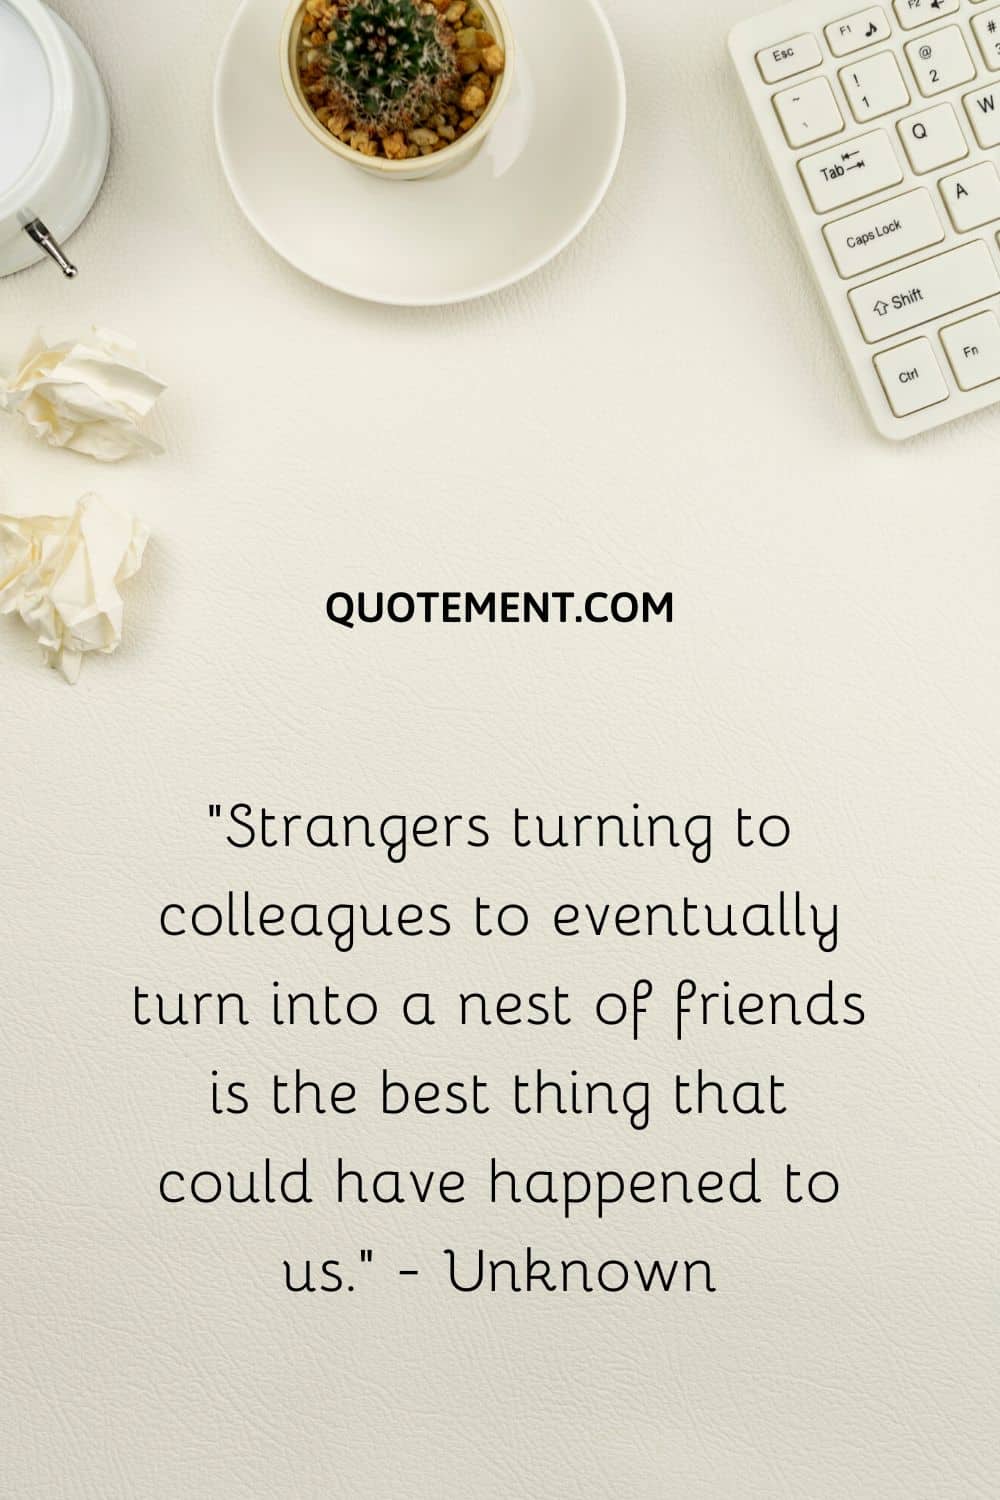 “Strangers turning to colleagues to eventually turn into a nest of friends is the best thing that could have happened to us.” - Unknown